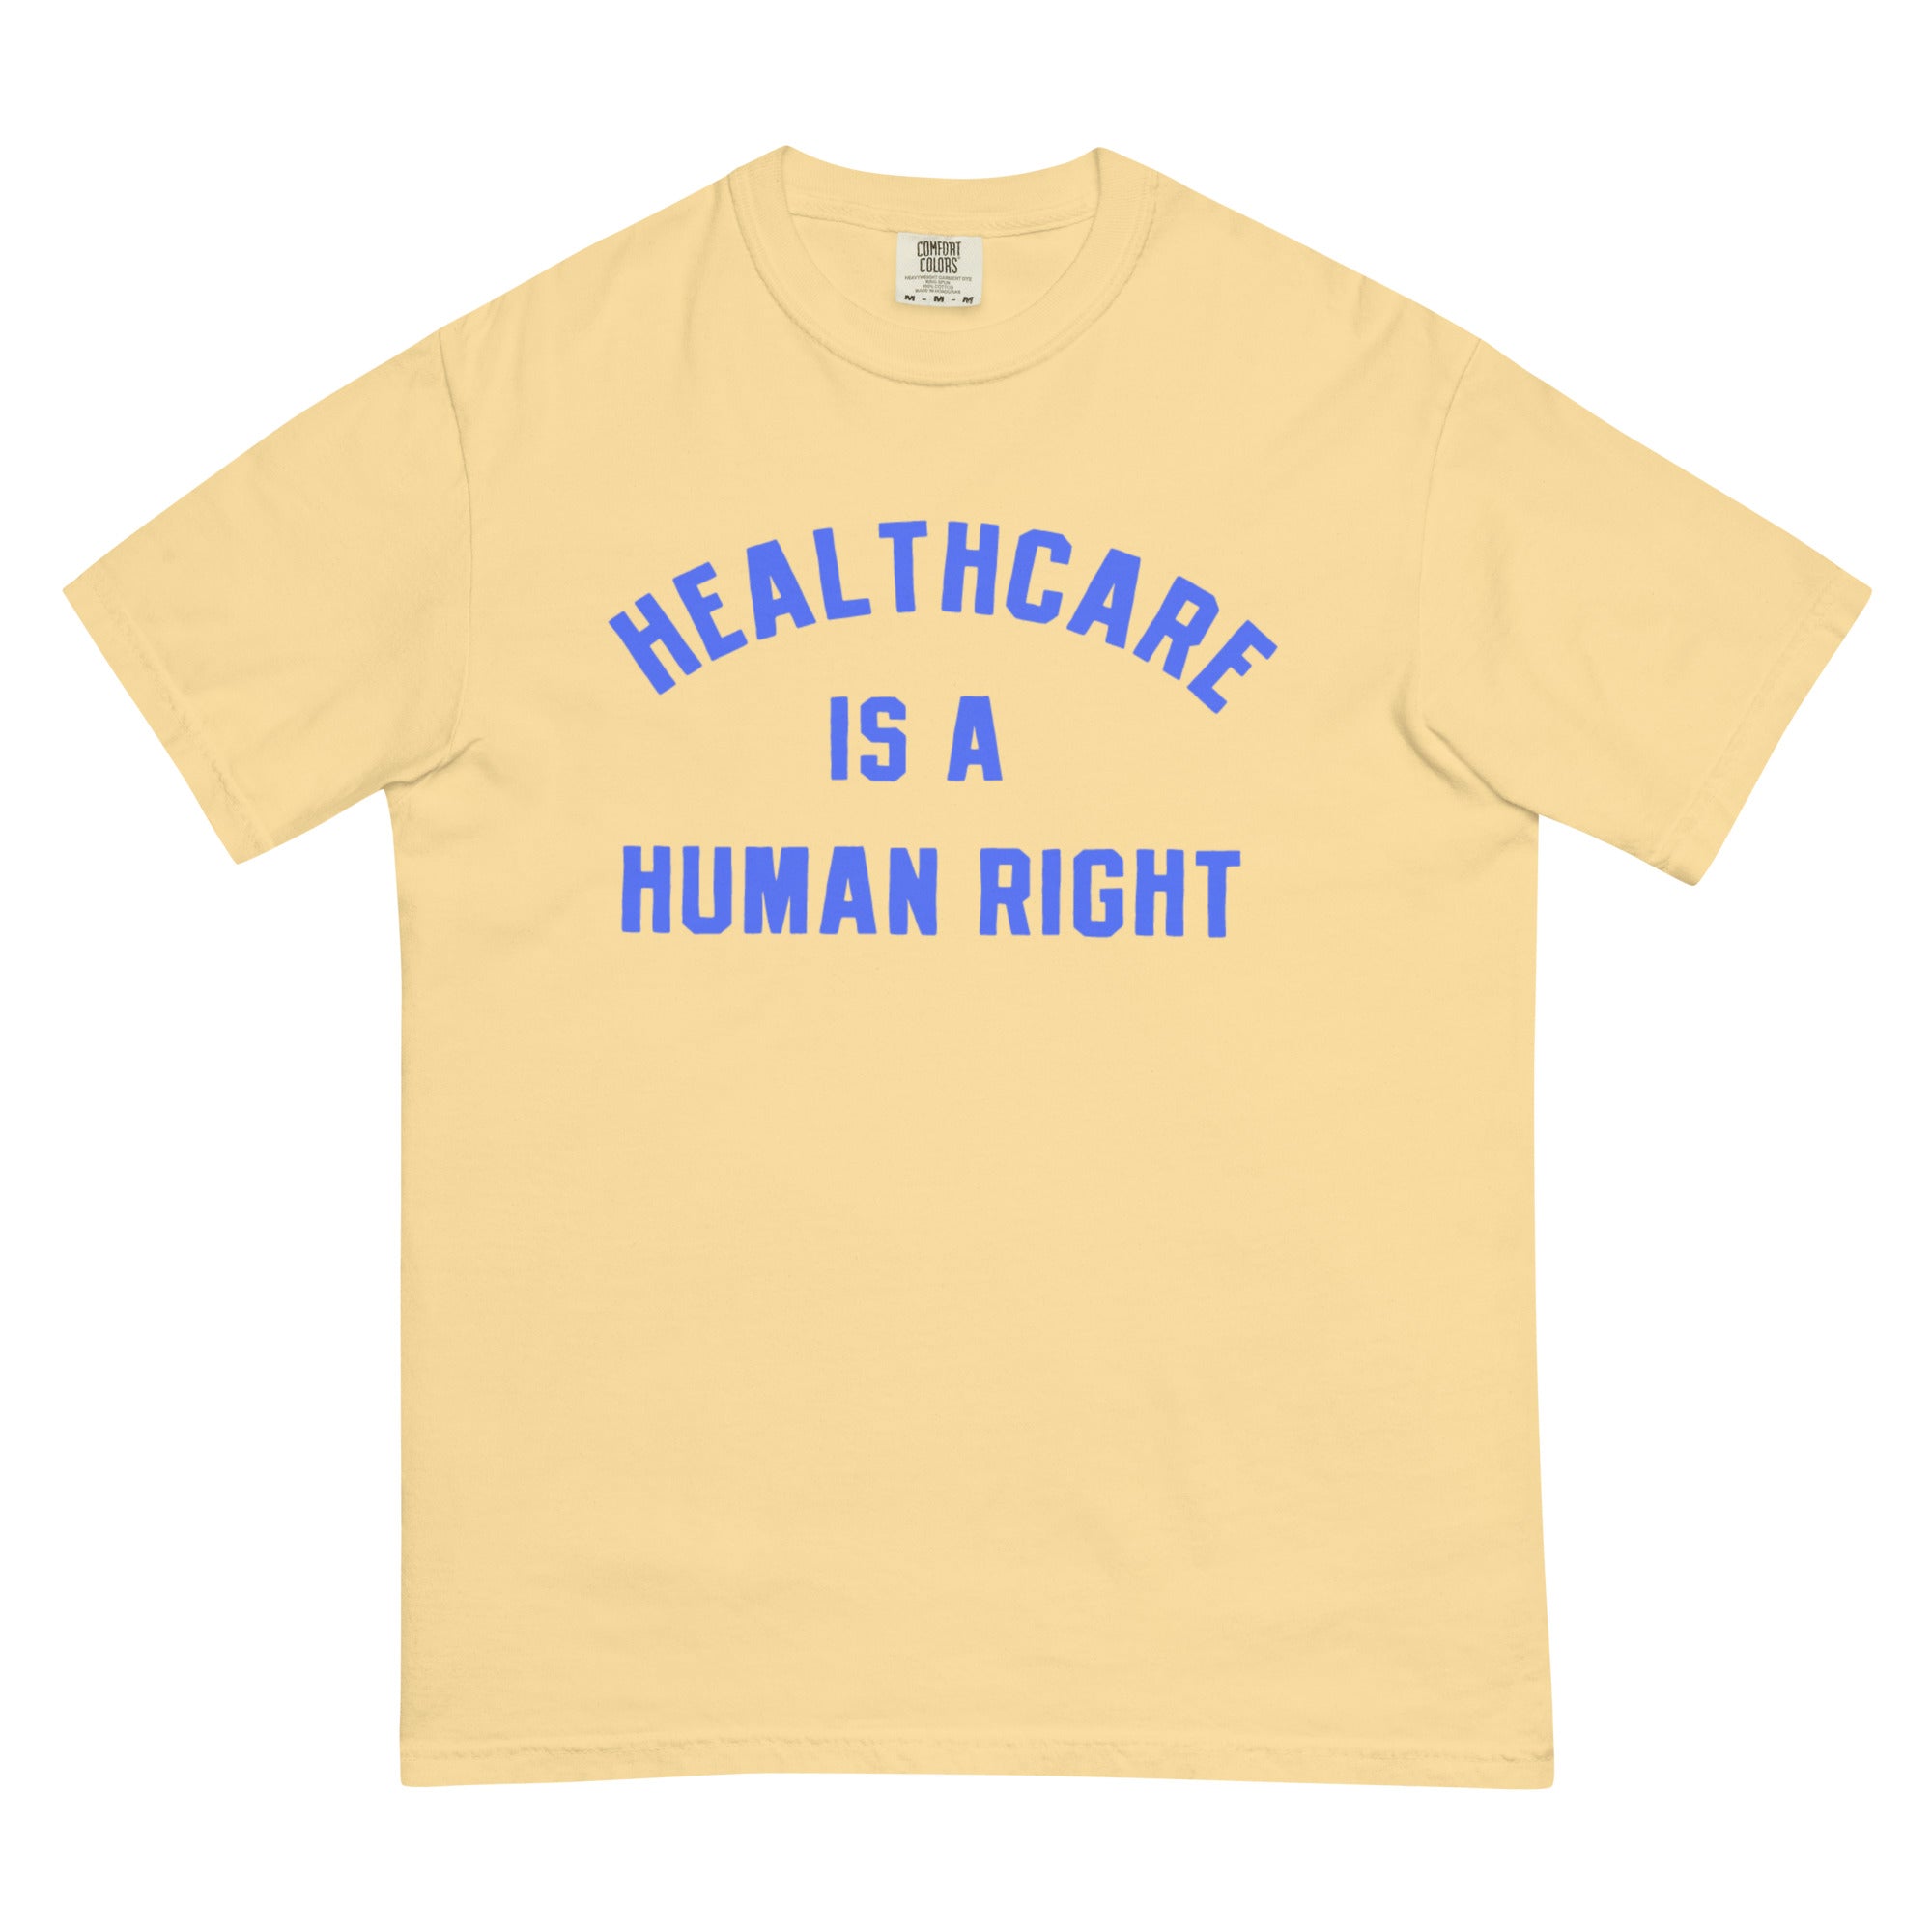 Healthcare is a Human Right Tee - Yellow